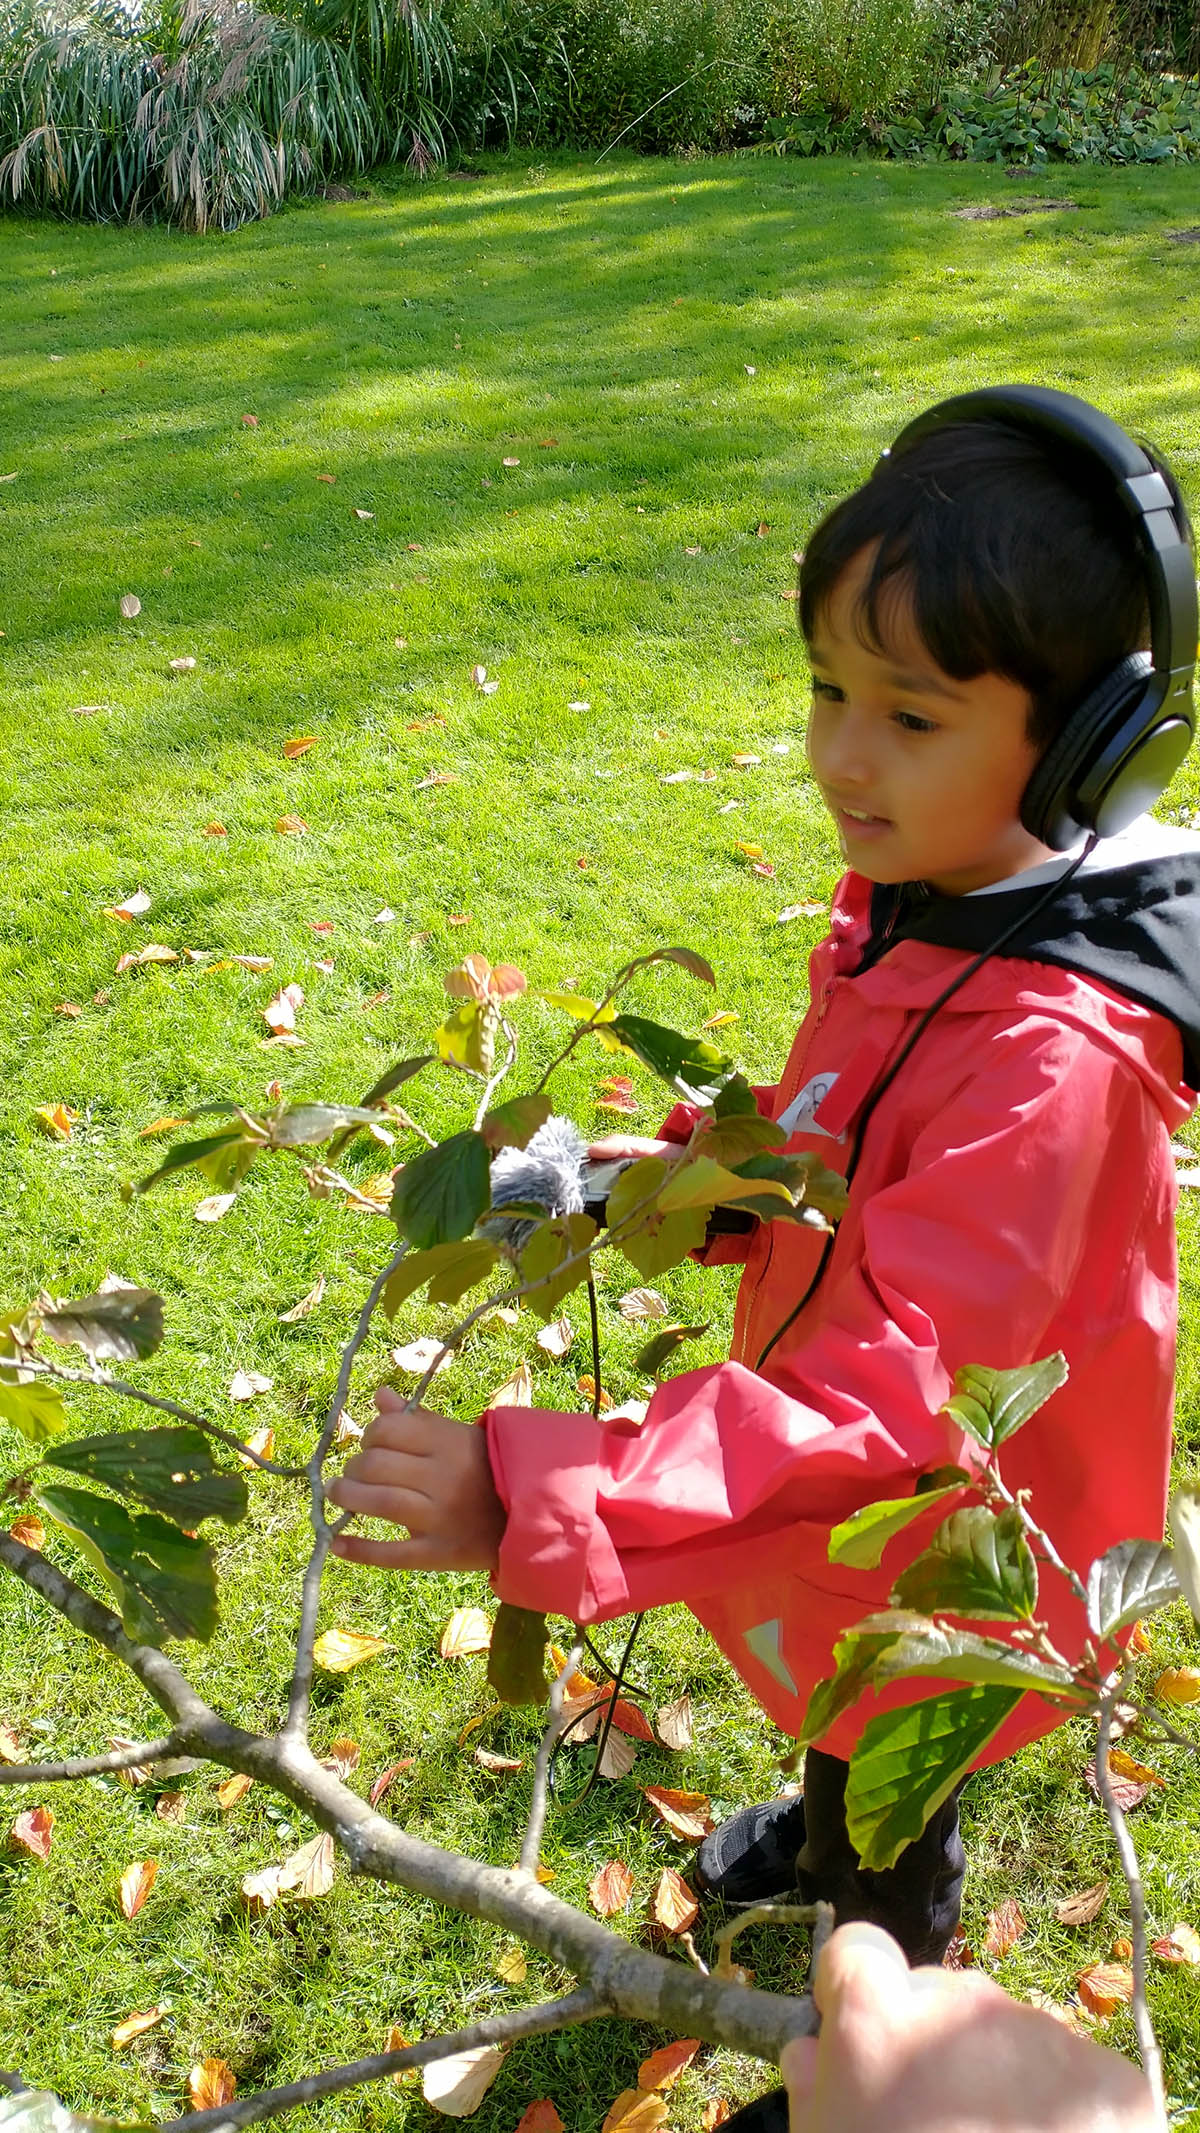 Boy, wearing a red coat and headphones, looking at a branch which is being held at the bottom right corner of the photo